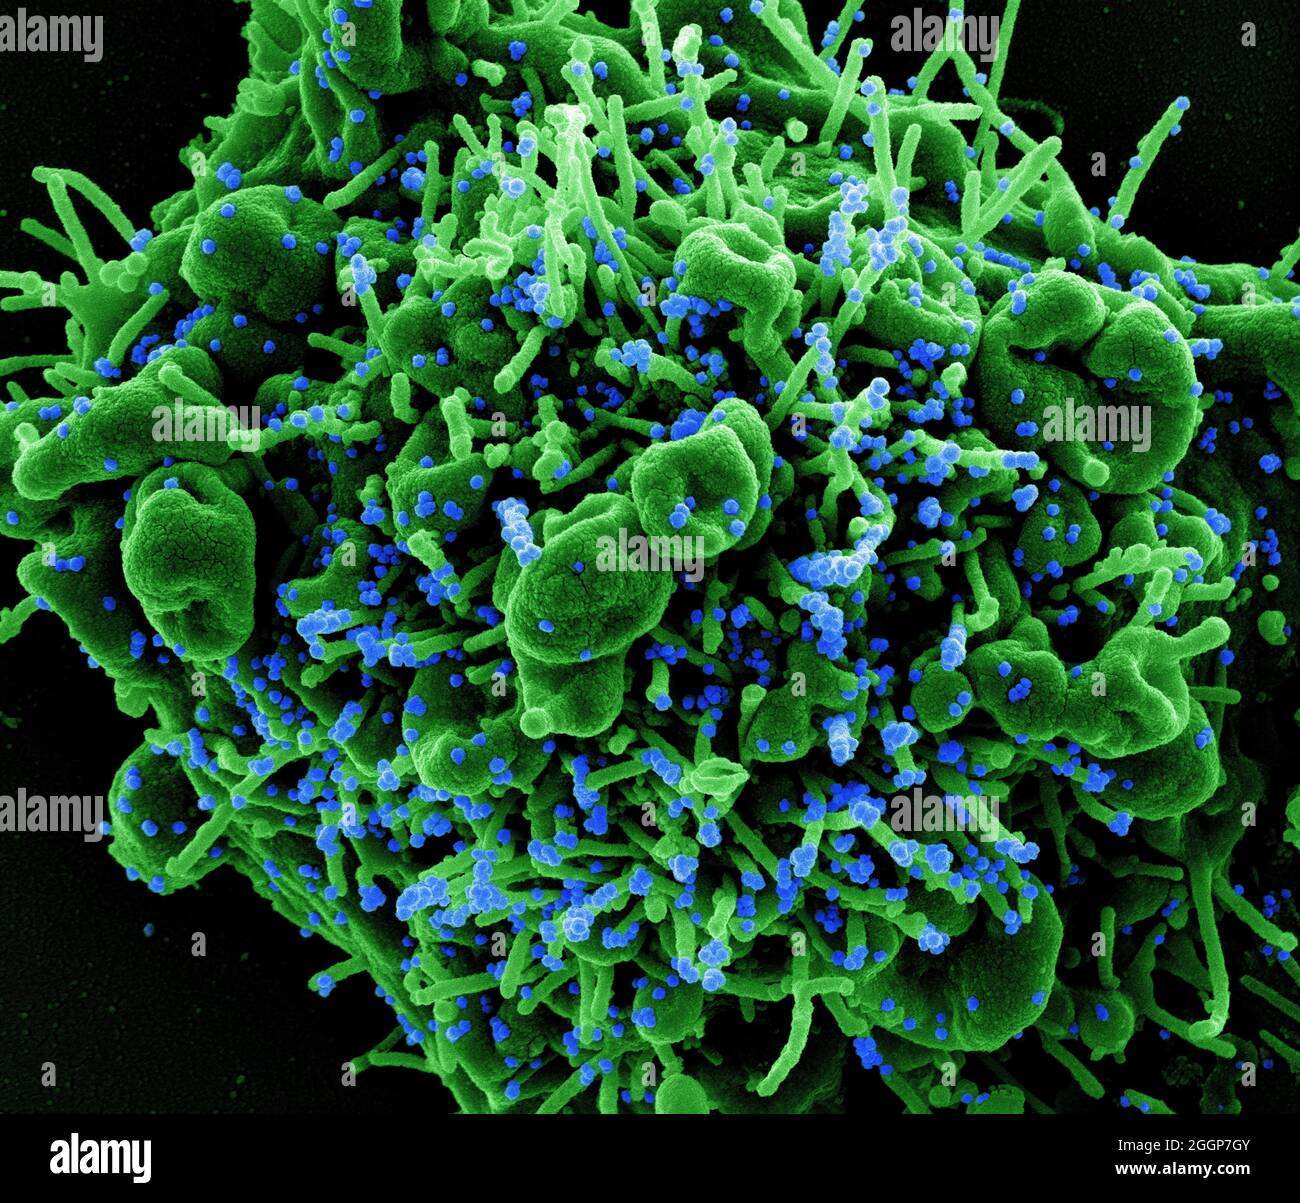 Colorized scanning electron micrograph of an apoptotic cell (green) infected with SARS-COV-2 virus particles (blue), isolated from a patient sample. Stock Photo